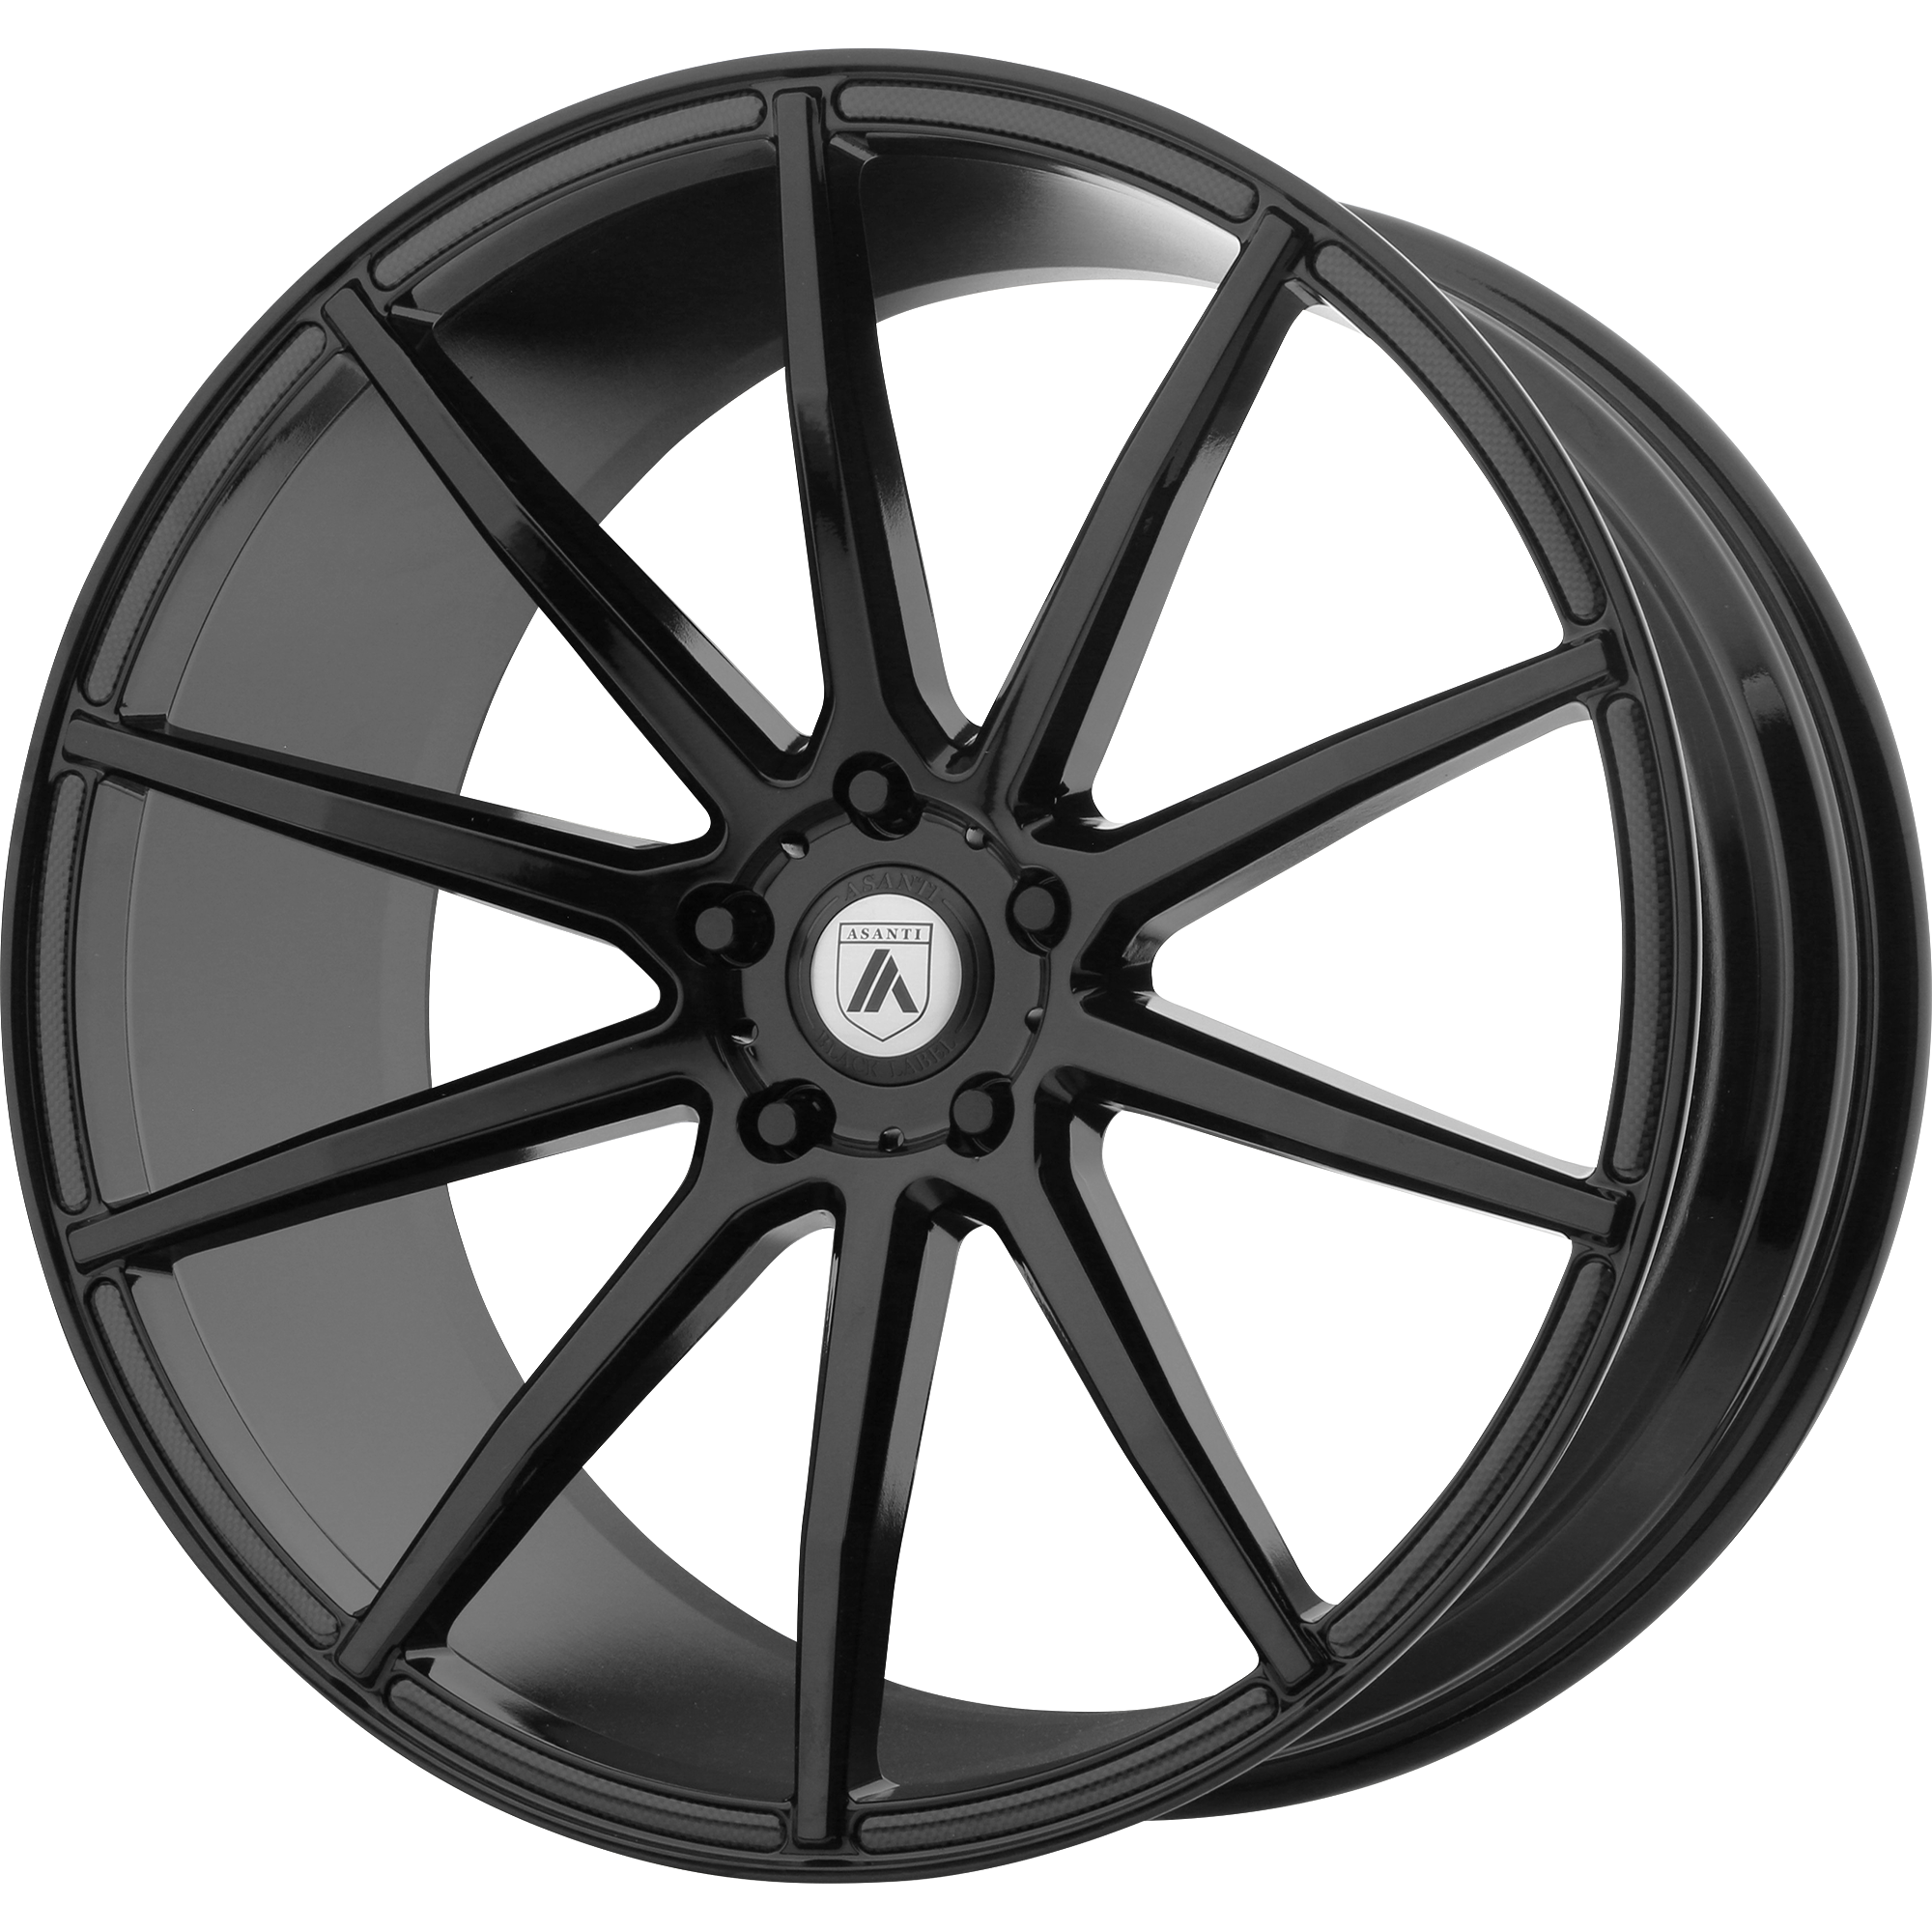 ARIES 20x8.5 5x120.00 GLOSS BLACK (38 mm) - Tires and Engine Performance